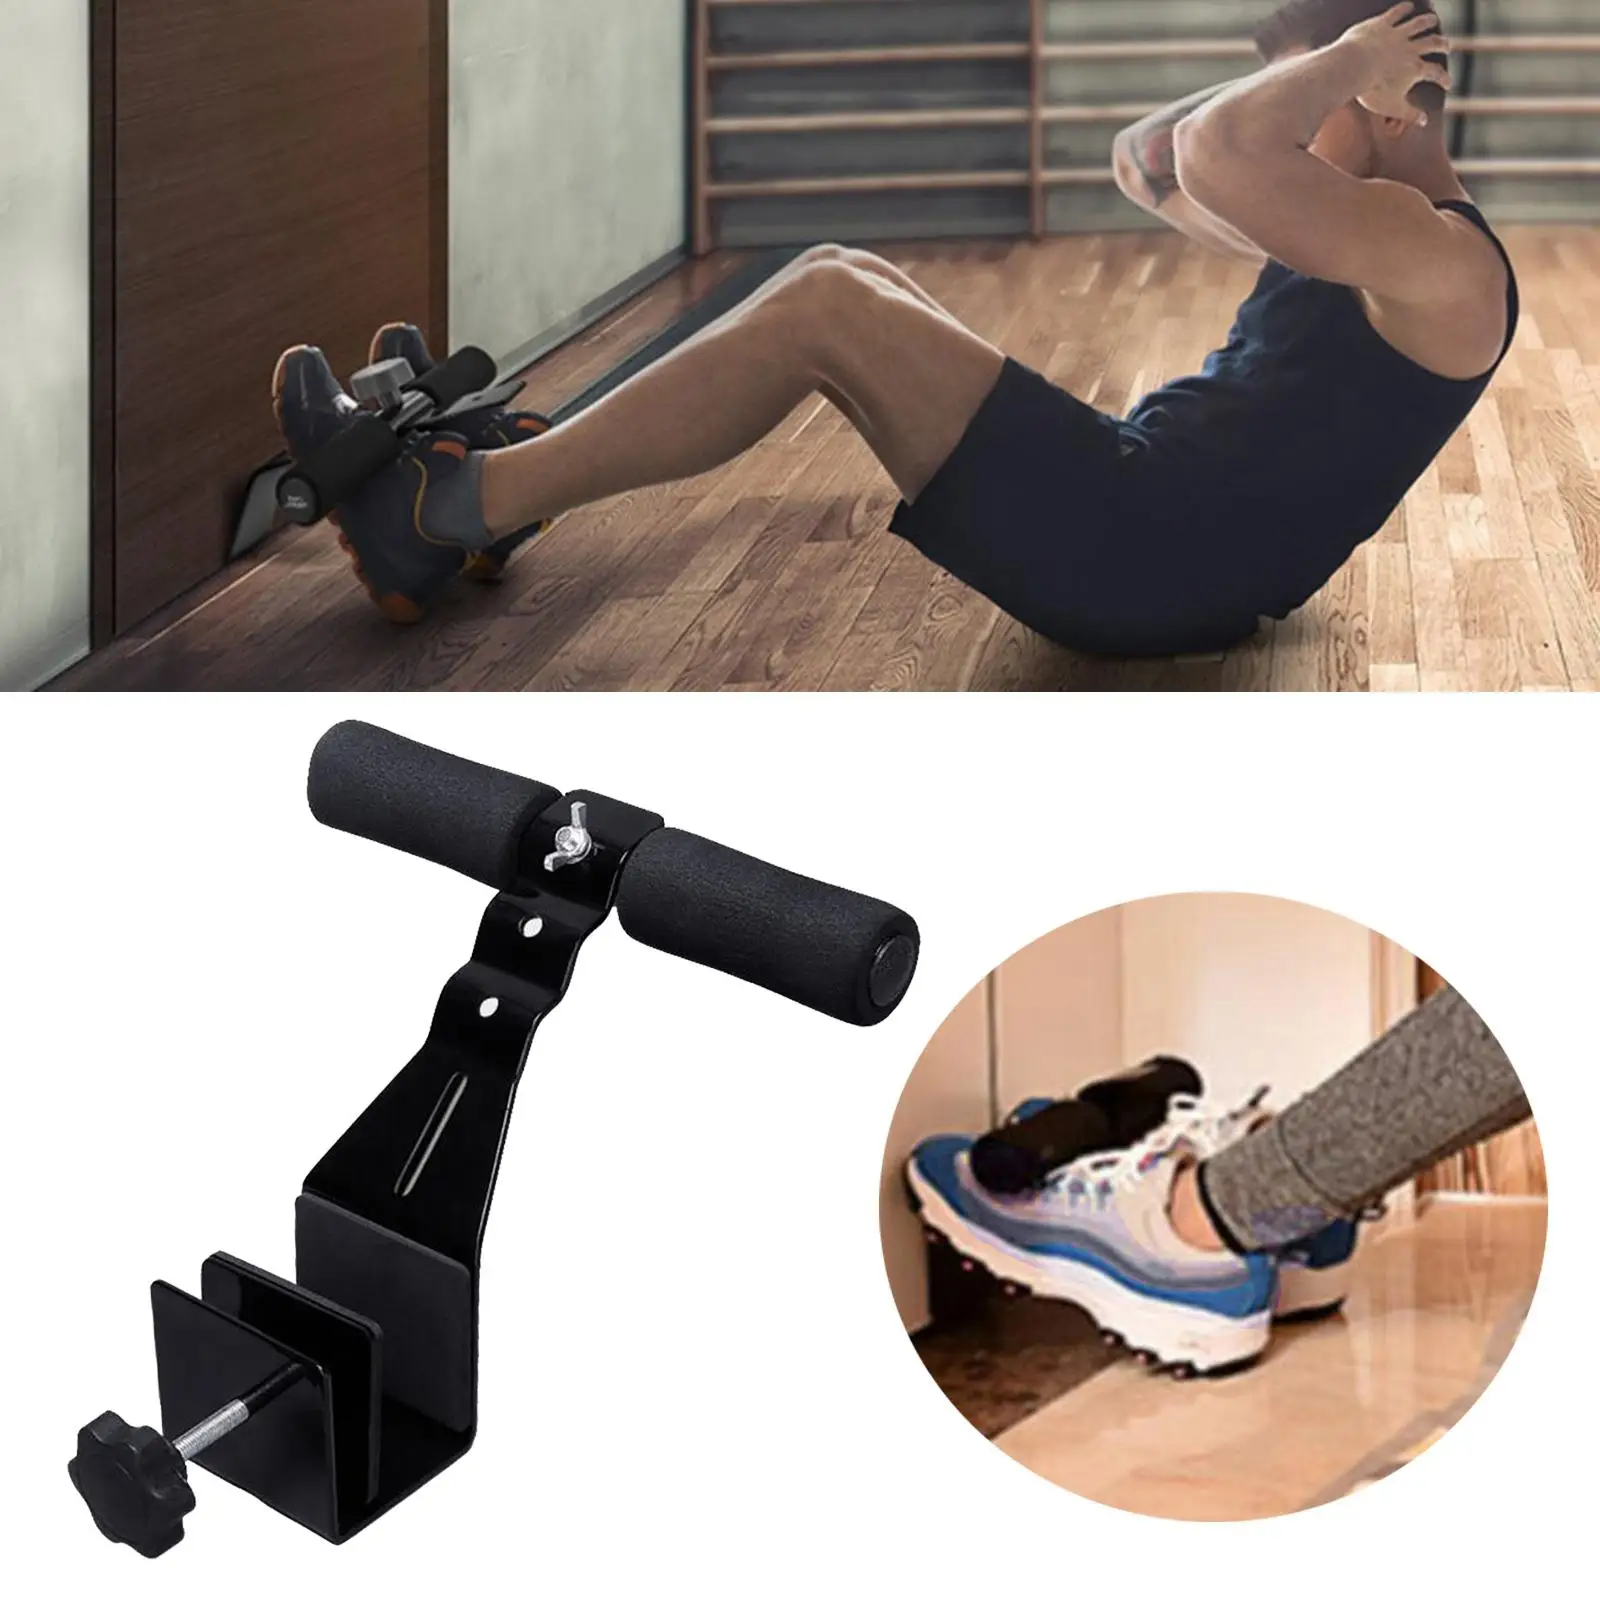 Sit up Bar Home Fits Any Door Equipment Sit up Assistant Device for Abdominal Muscle Fitness Core Strength Dorm Gym